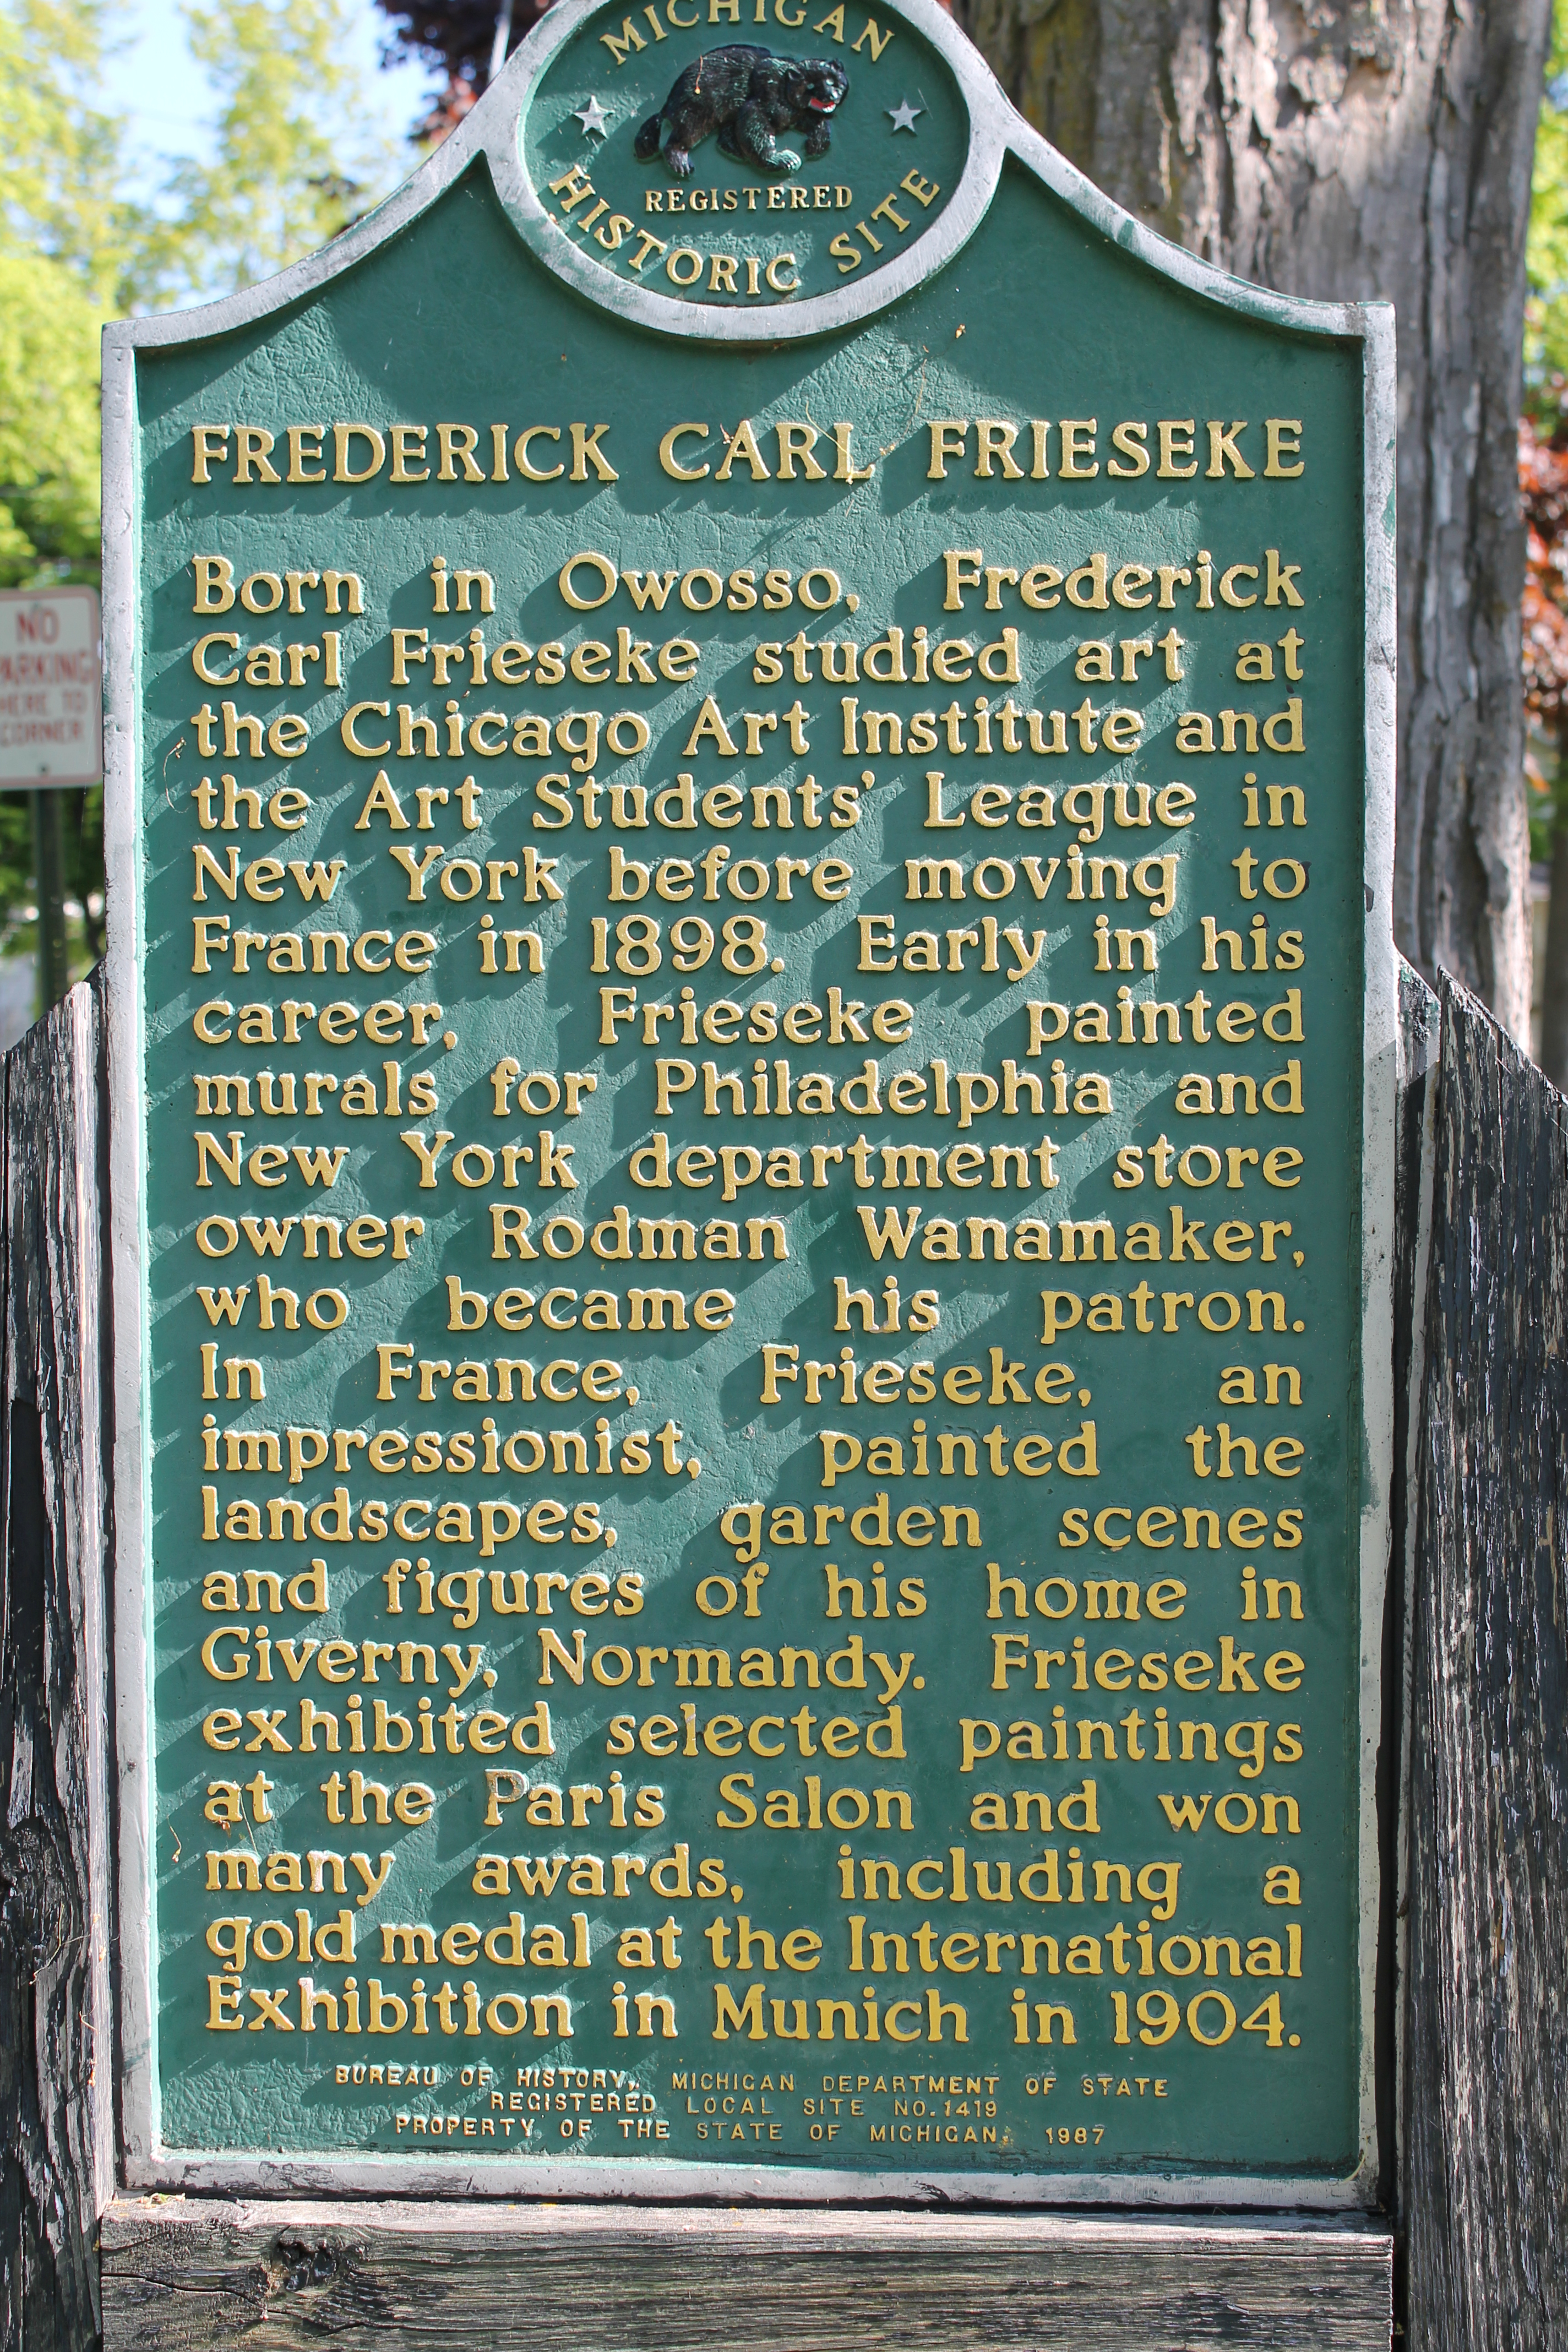 Photo of historical marker about Frederick Carl Frieseke